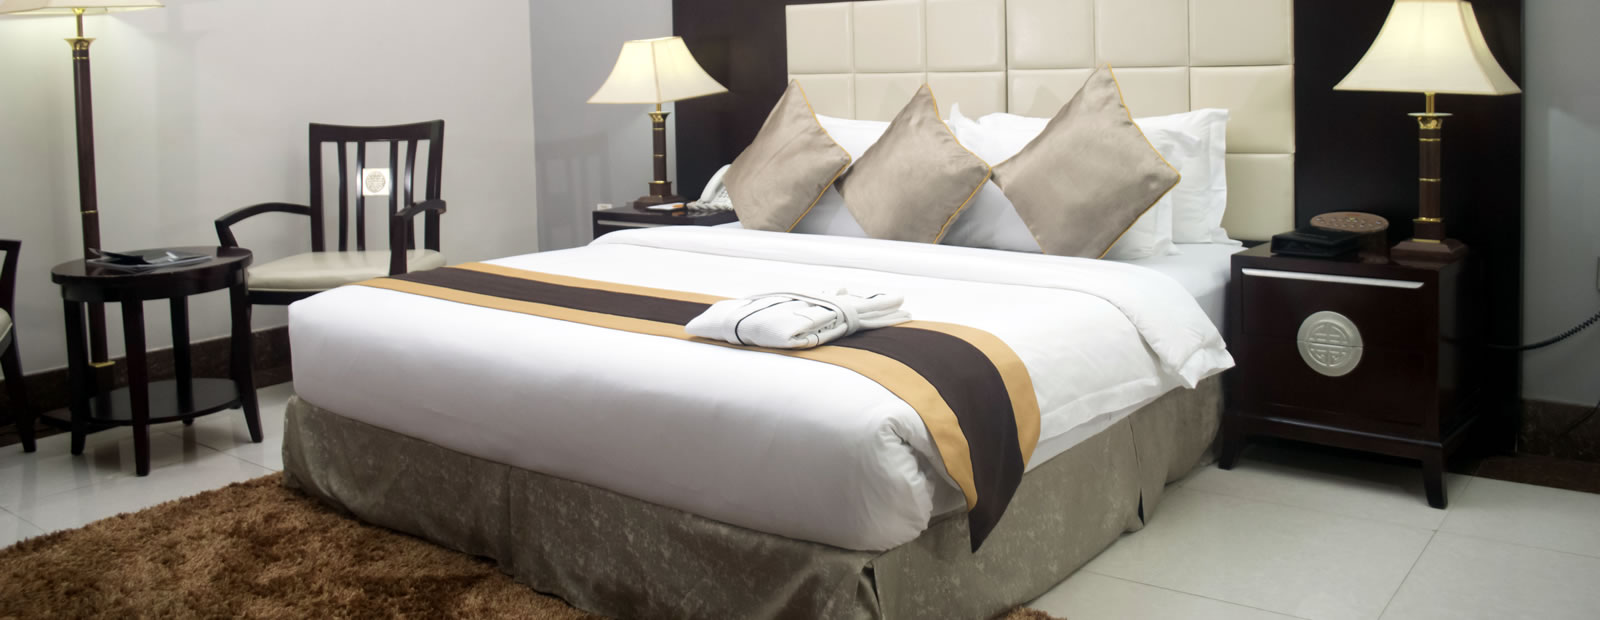 Grandbee Suites Lagos Best Prices For Hotels In Lagos